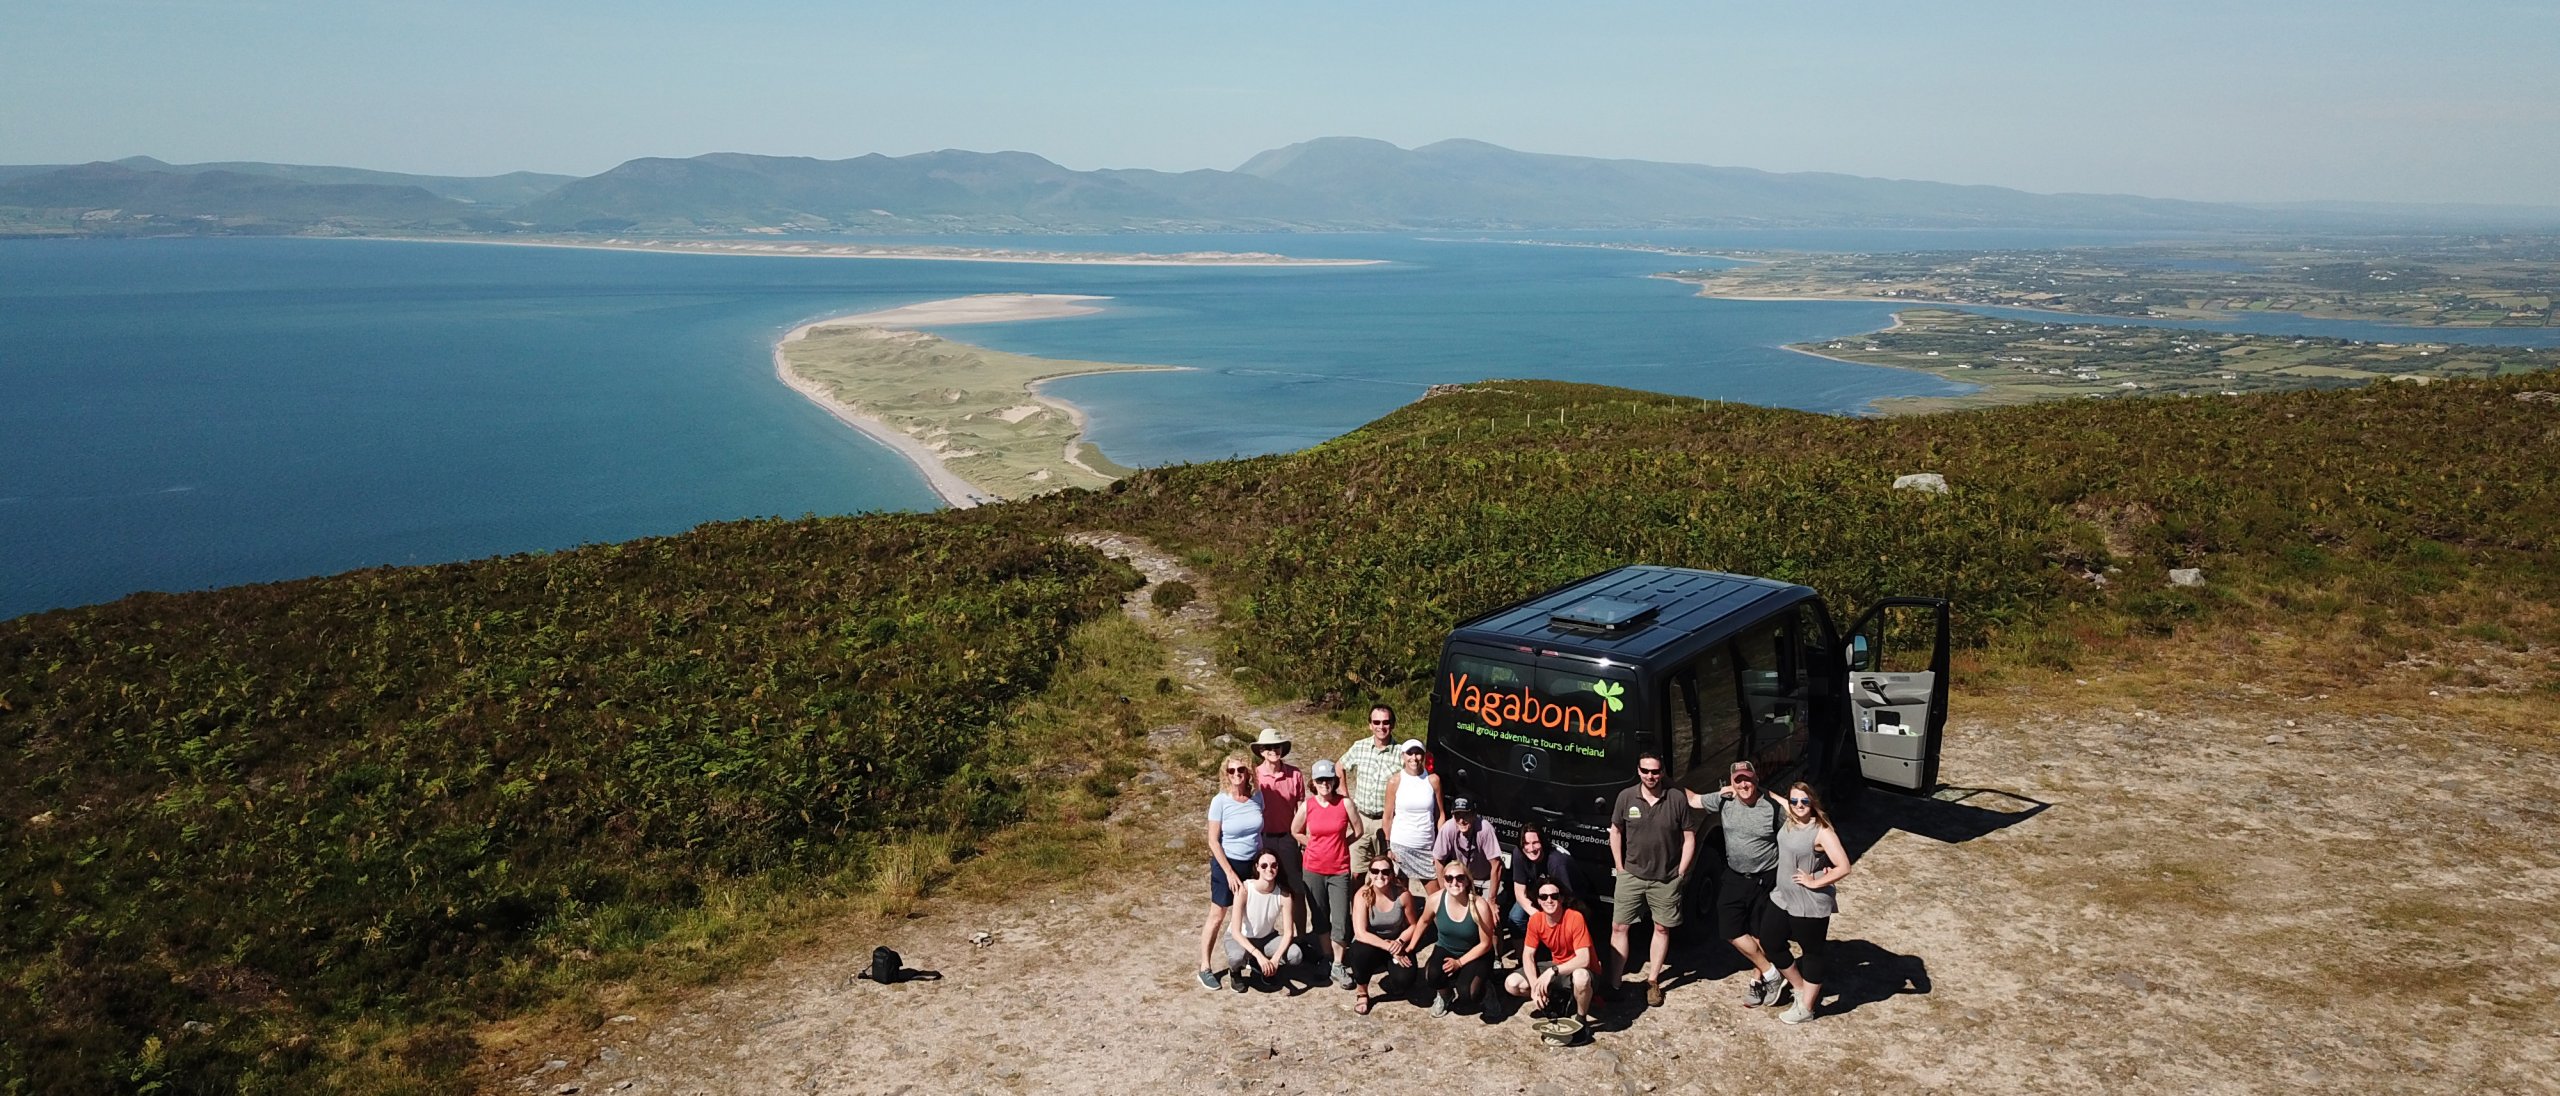 Vagabond tour group at a scenic spot in Ireland 